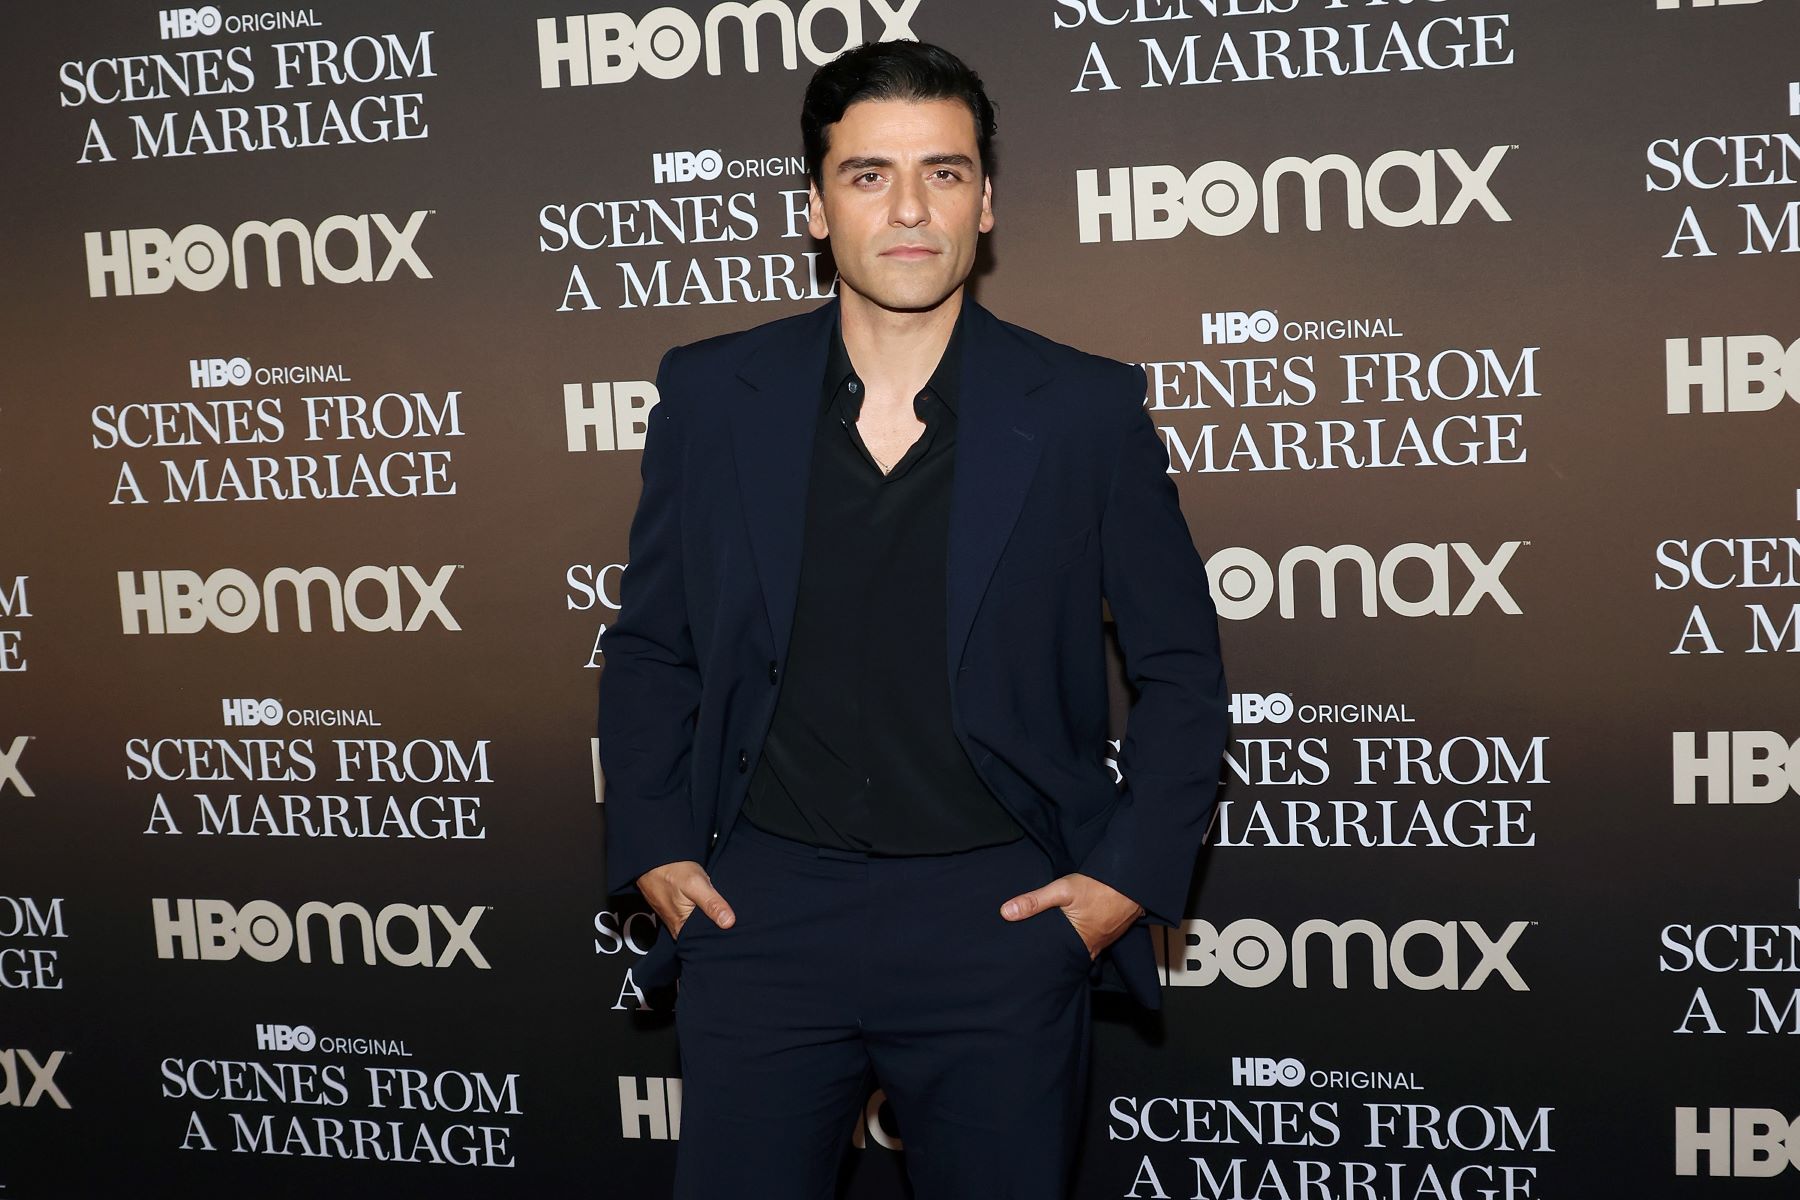 Oscar Isaac attending a screening of HBO's 'Scenes From a Marriage' at the Museum of Modern Art in New York City